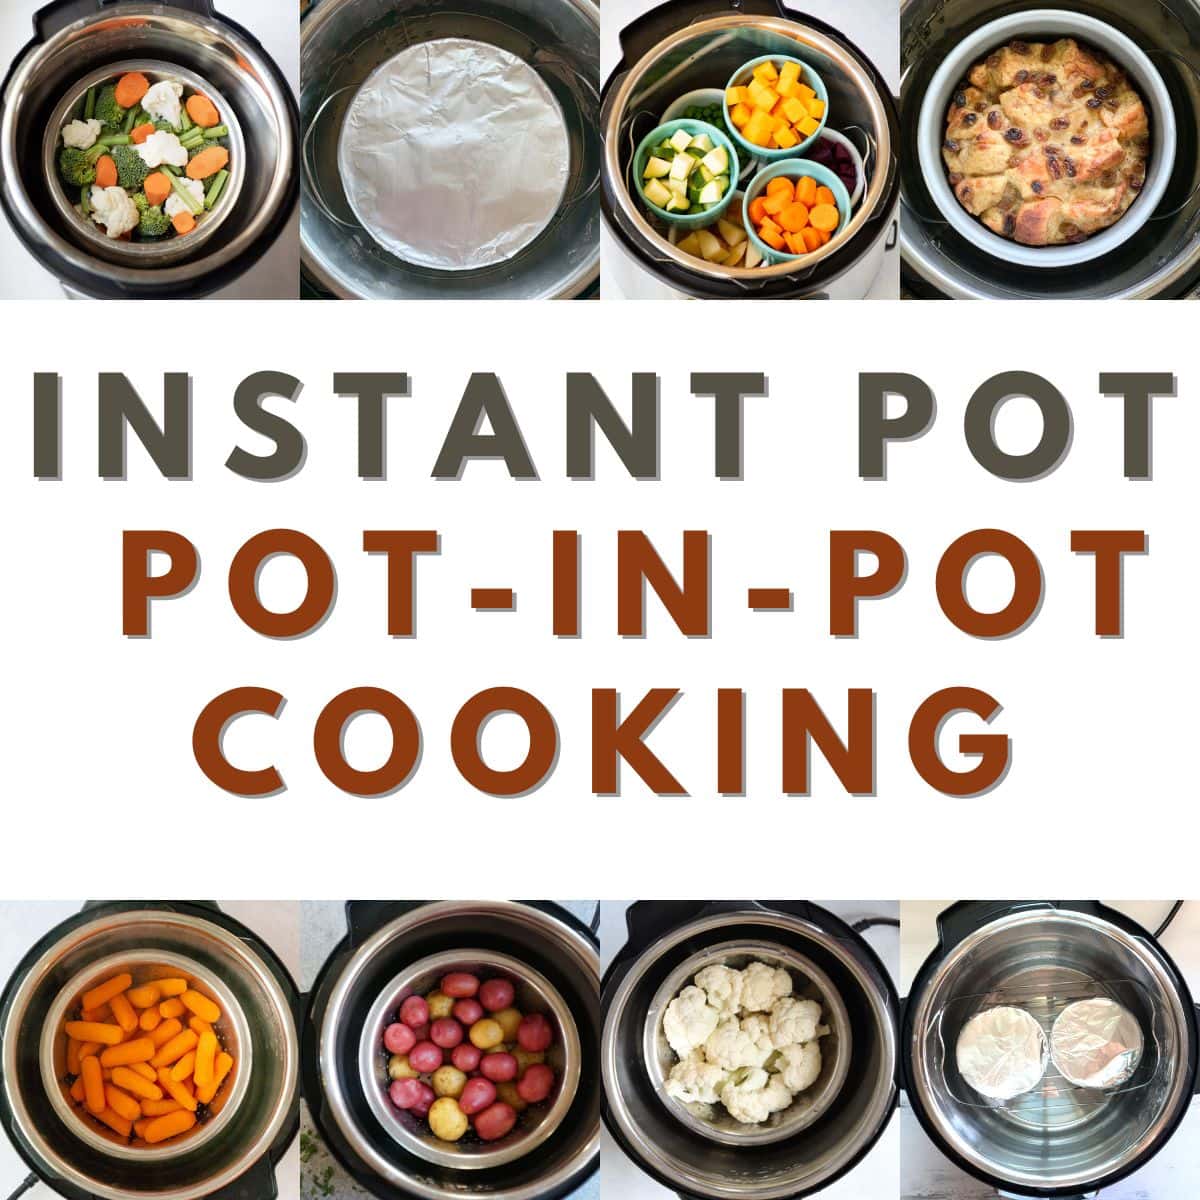 https://pipingpotcurry.com/wp-content/uploads/2022/08/How-To-Do-Pot-In-Pot-Cooking.jpg